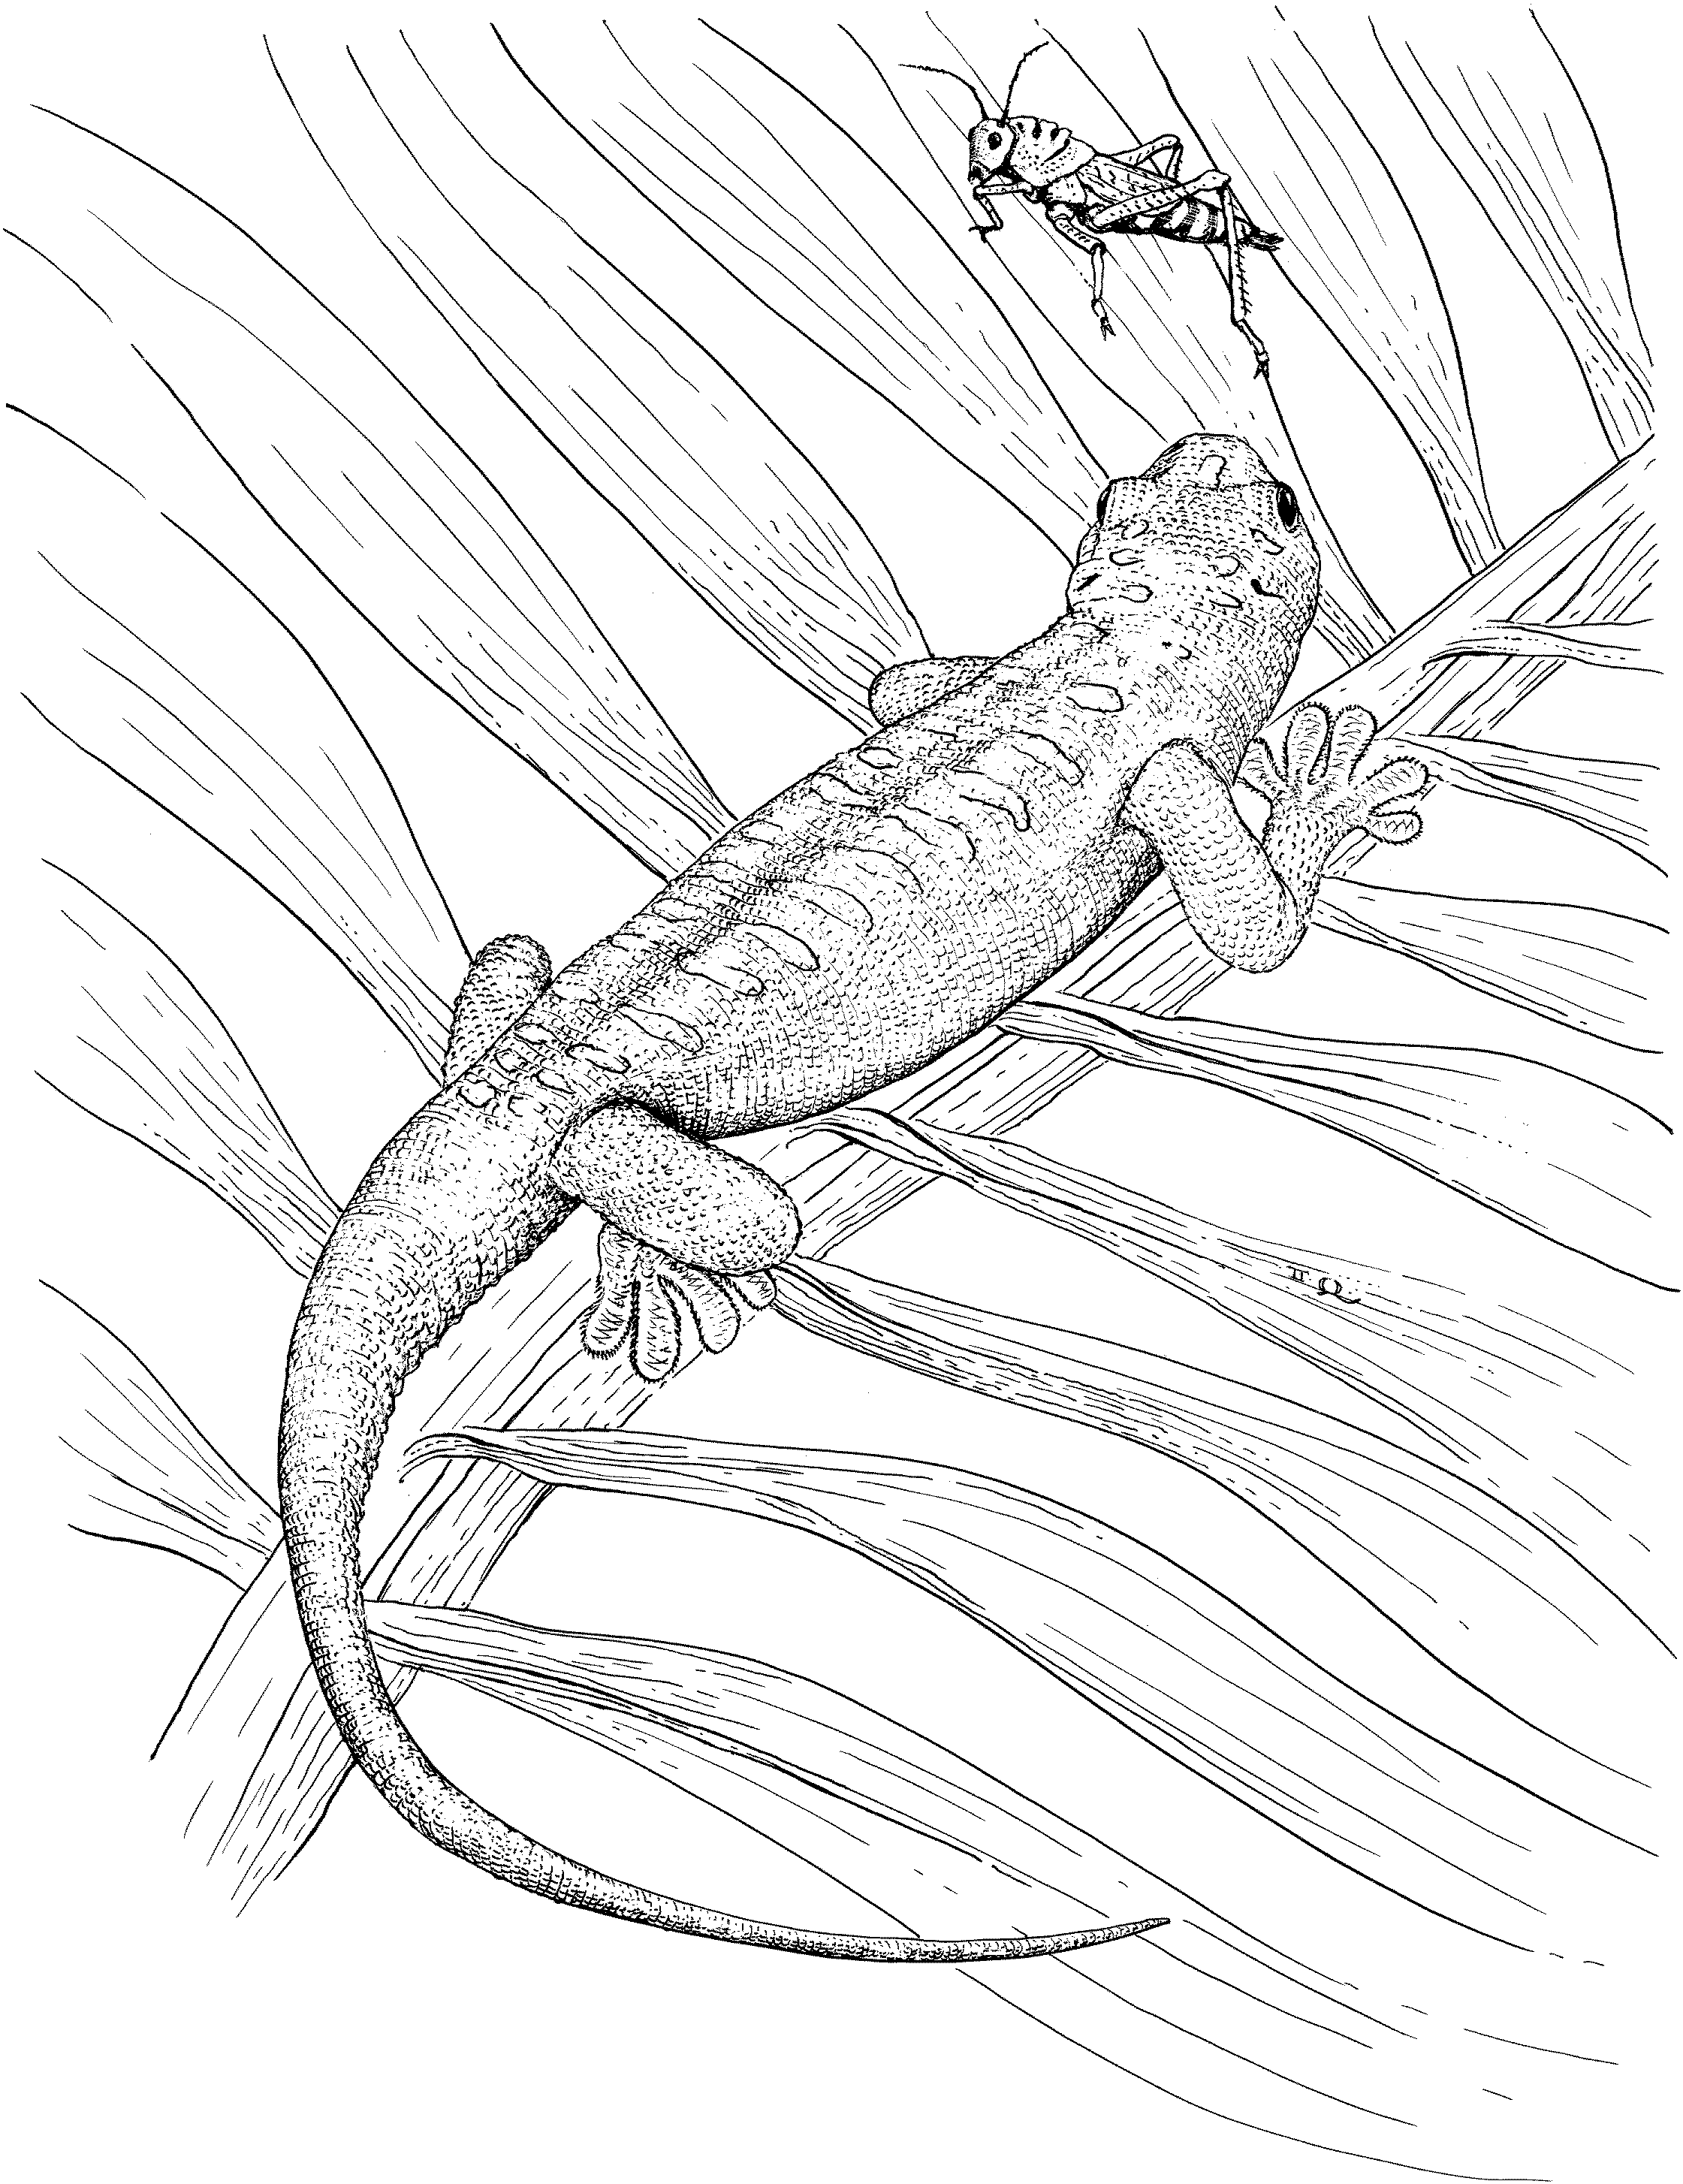 lizard-pictures-to-print-free-printable-lizard-coloring-pages-for-kids